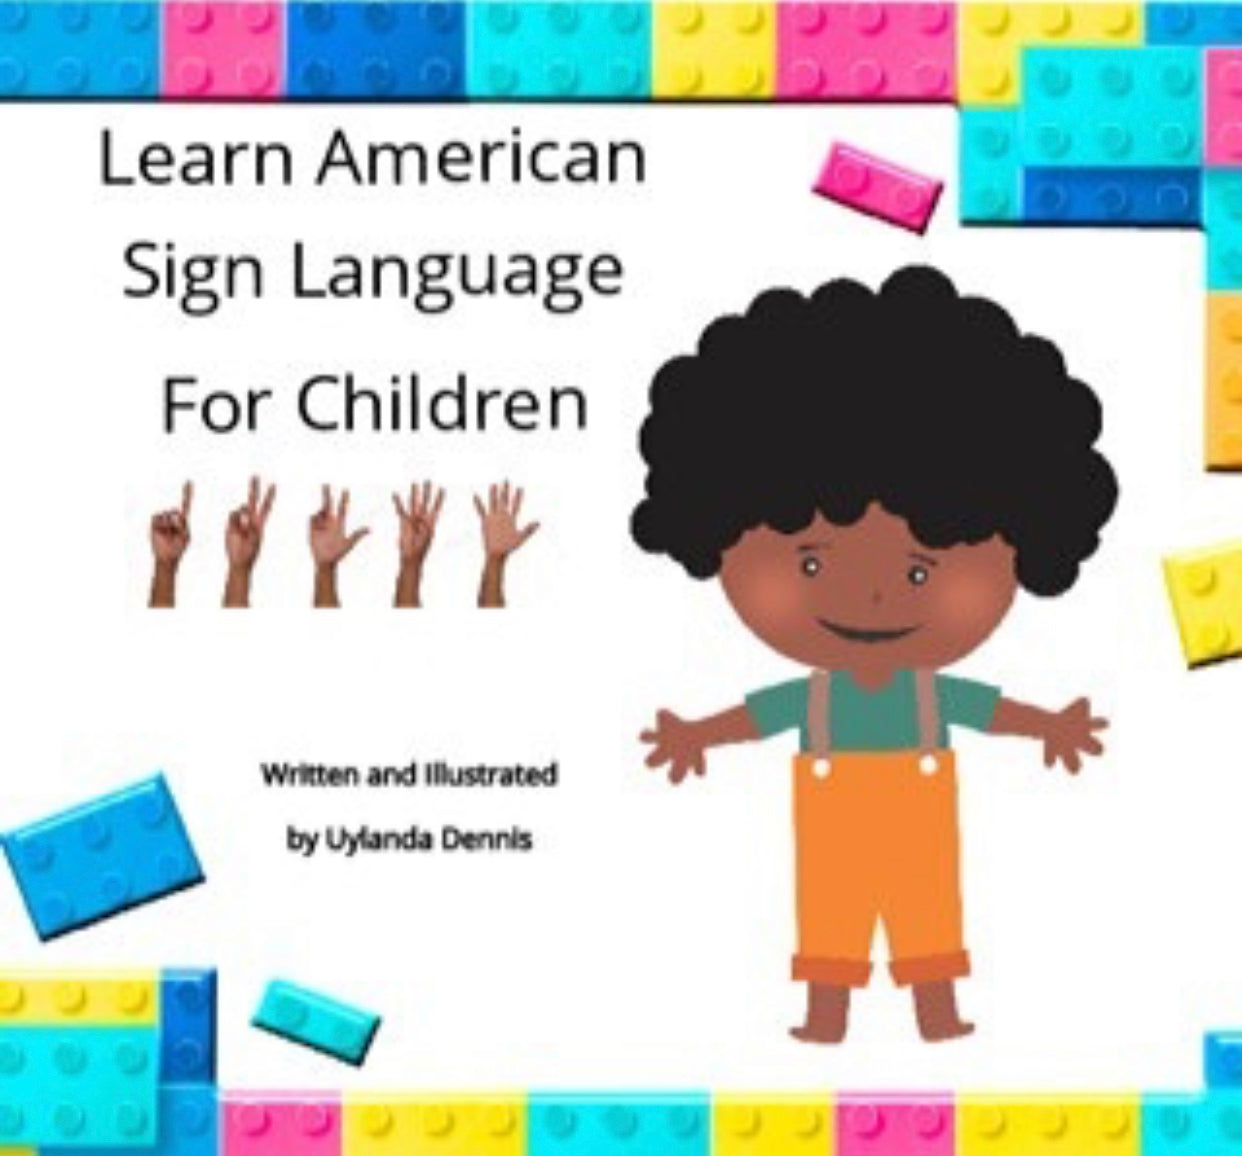 Learn American Sign Language for Children©️